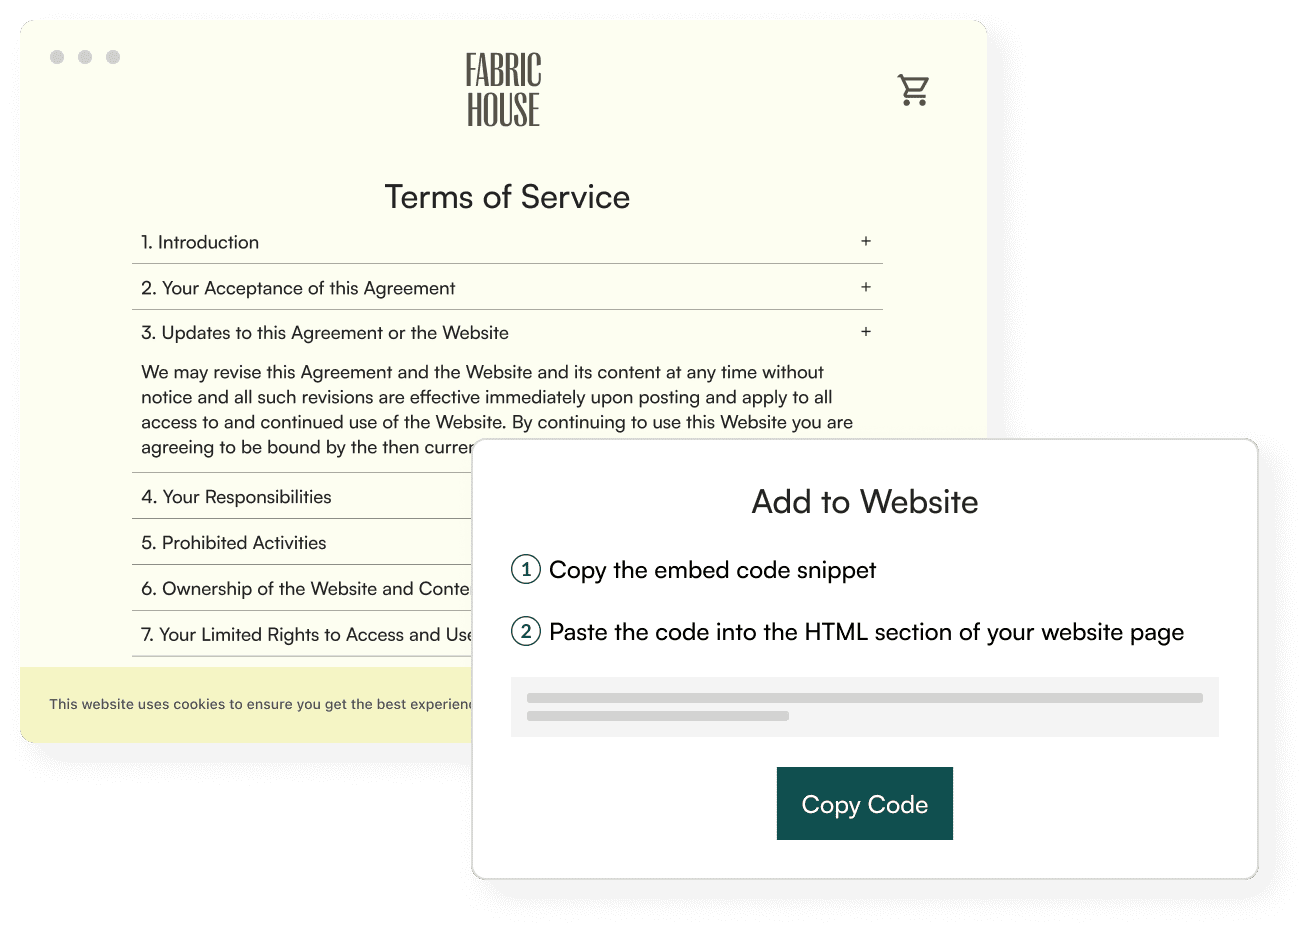 Terms of service + add to site